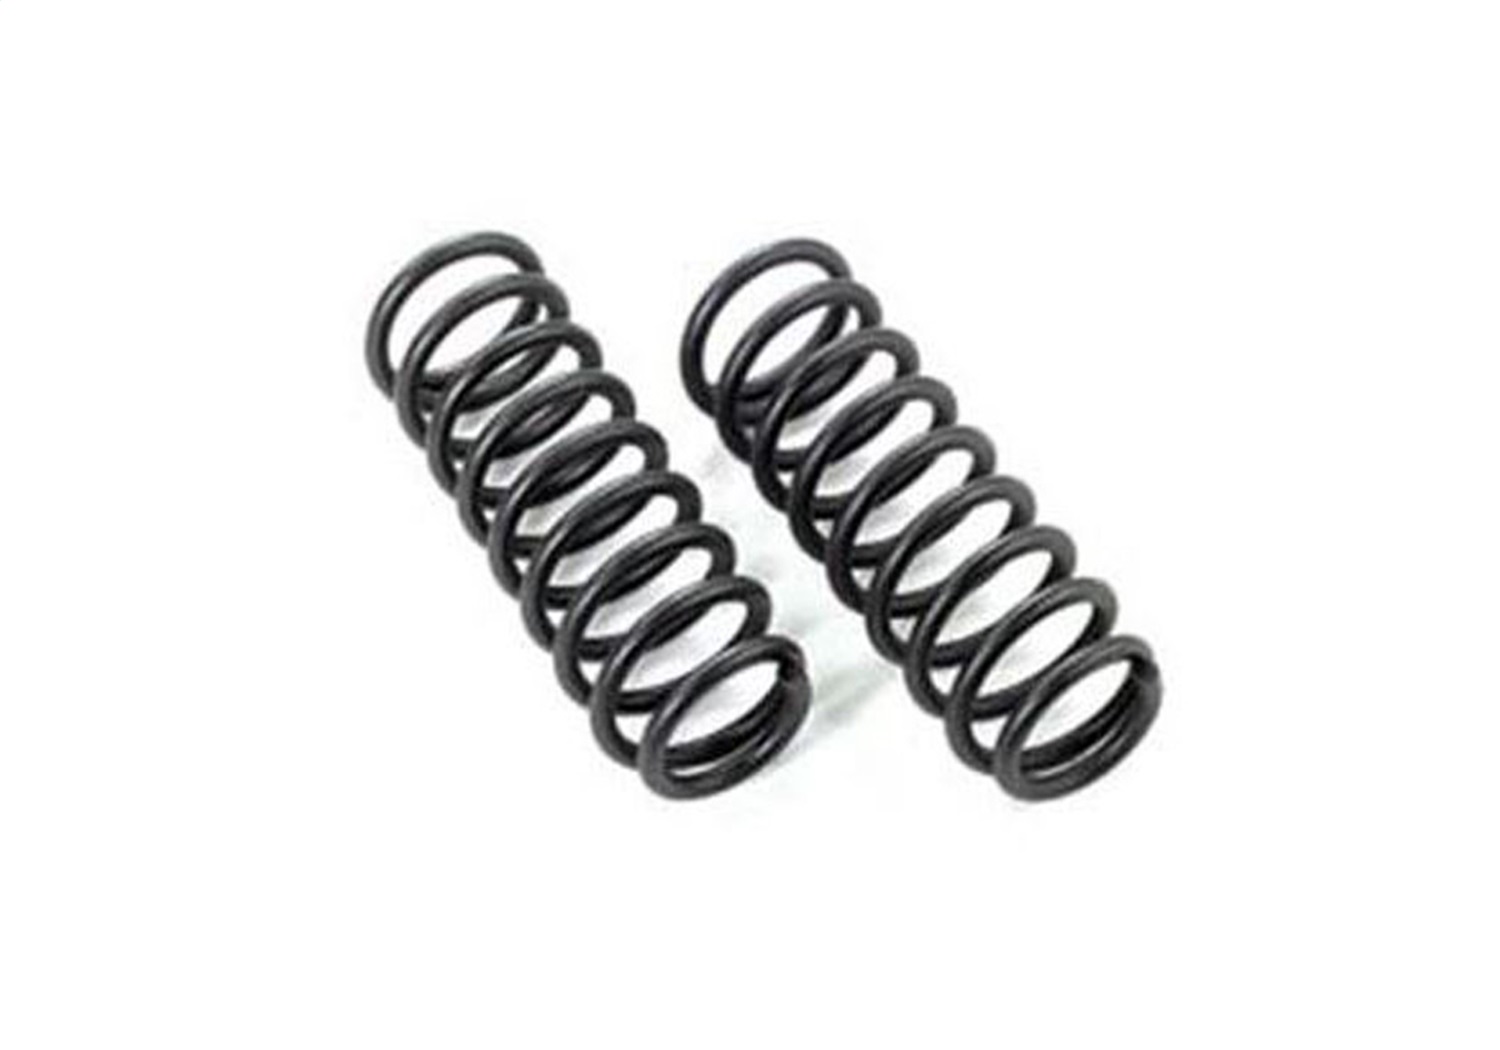 Superlift 294 Coil Springs Fits 05-14 F-250 Super Duty F-350 Super Duty